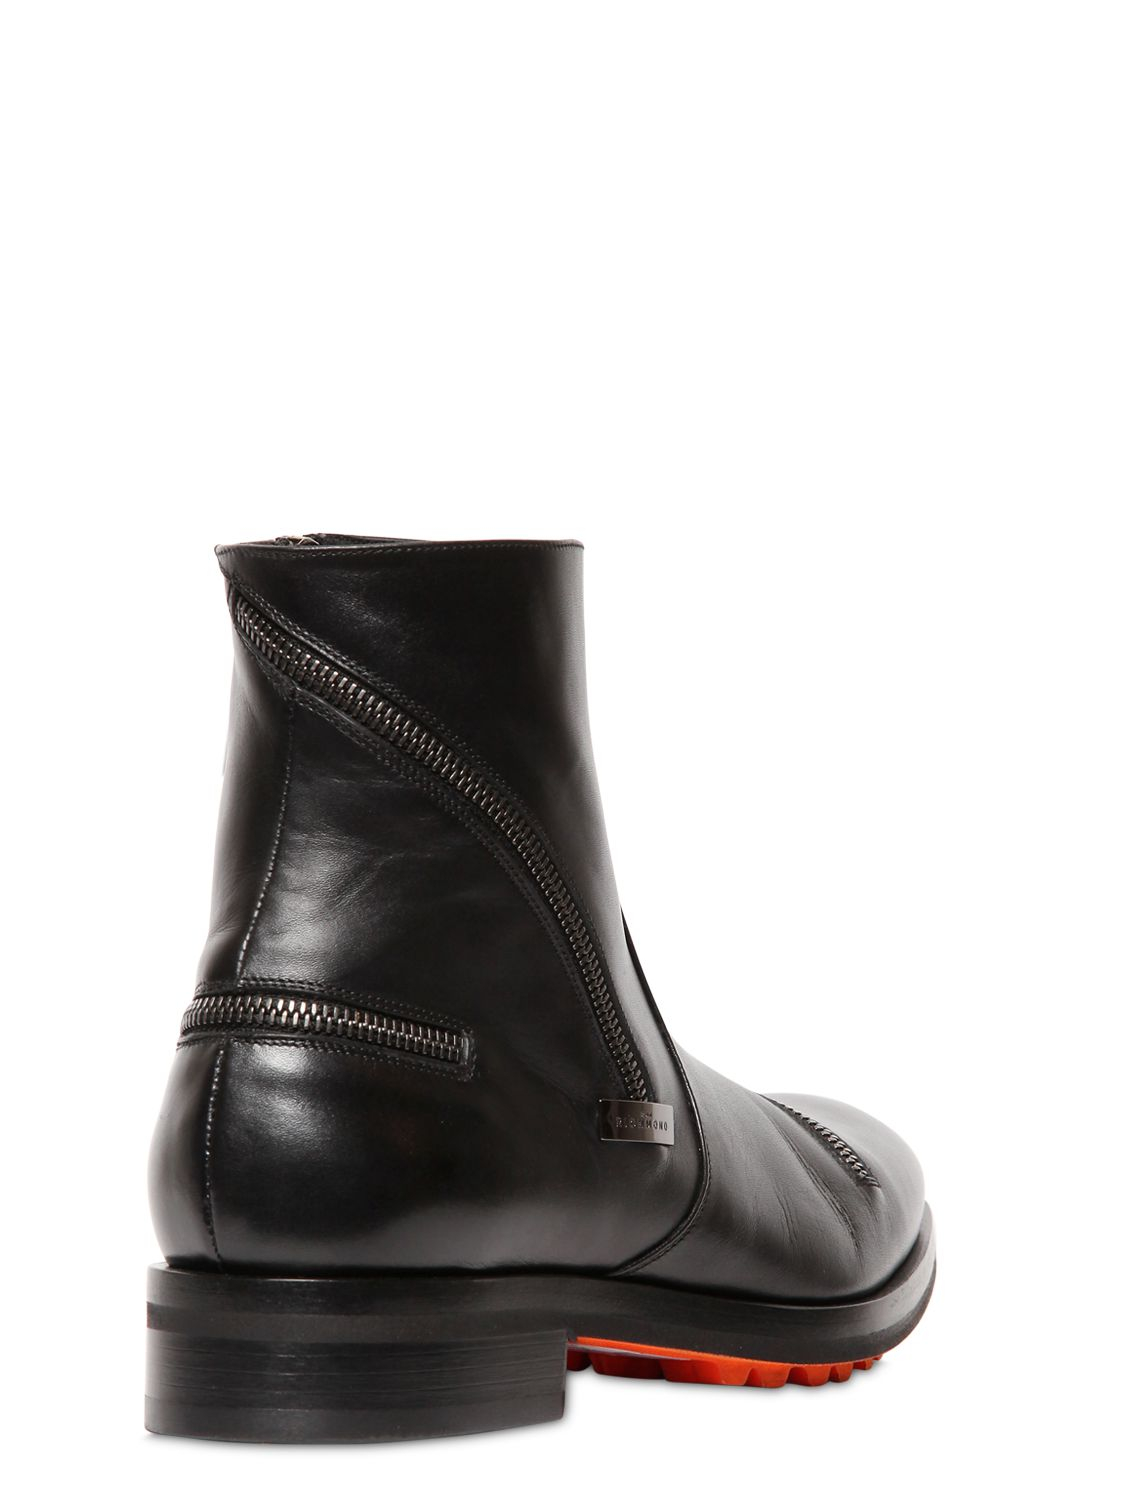 John Richmond Zip-up Smooth Leather Boots in Black - Lyst